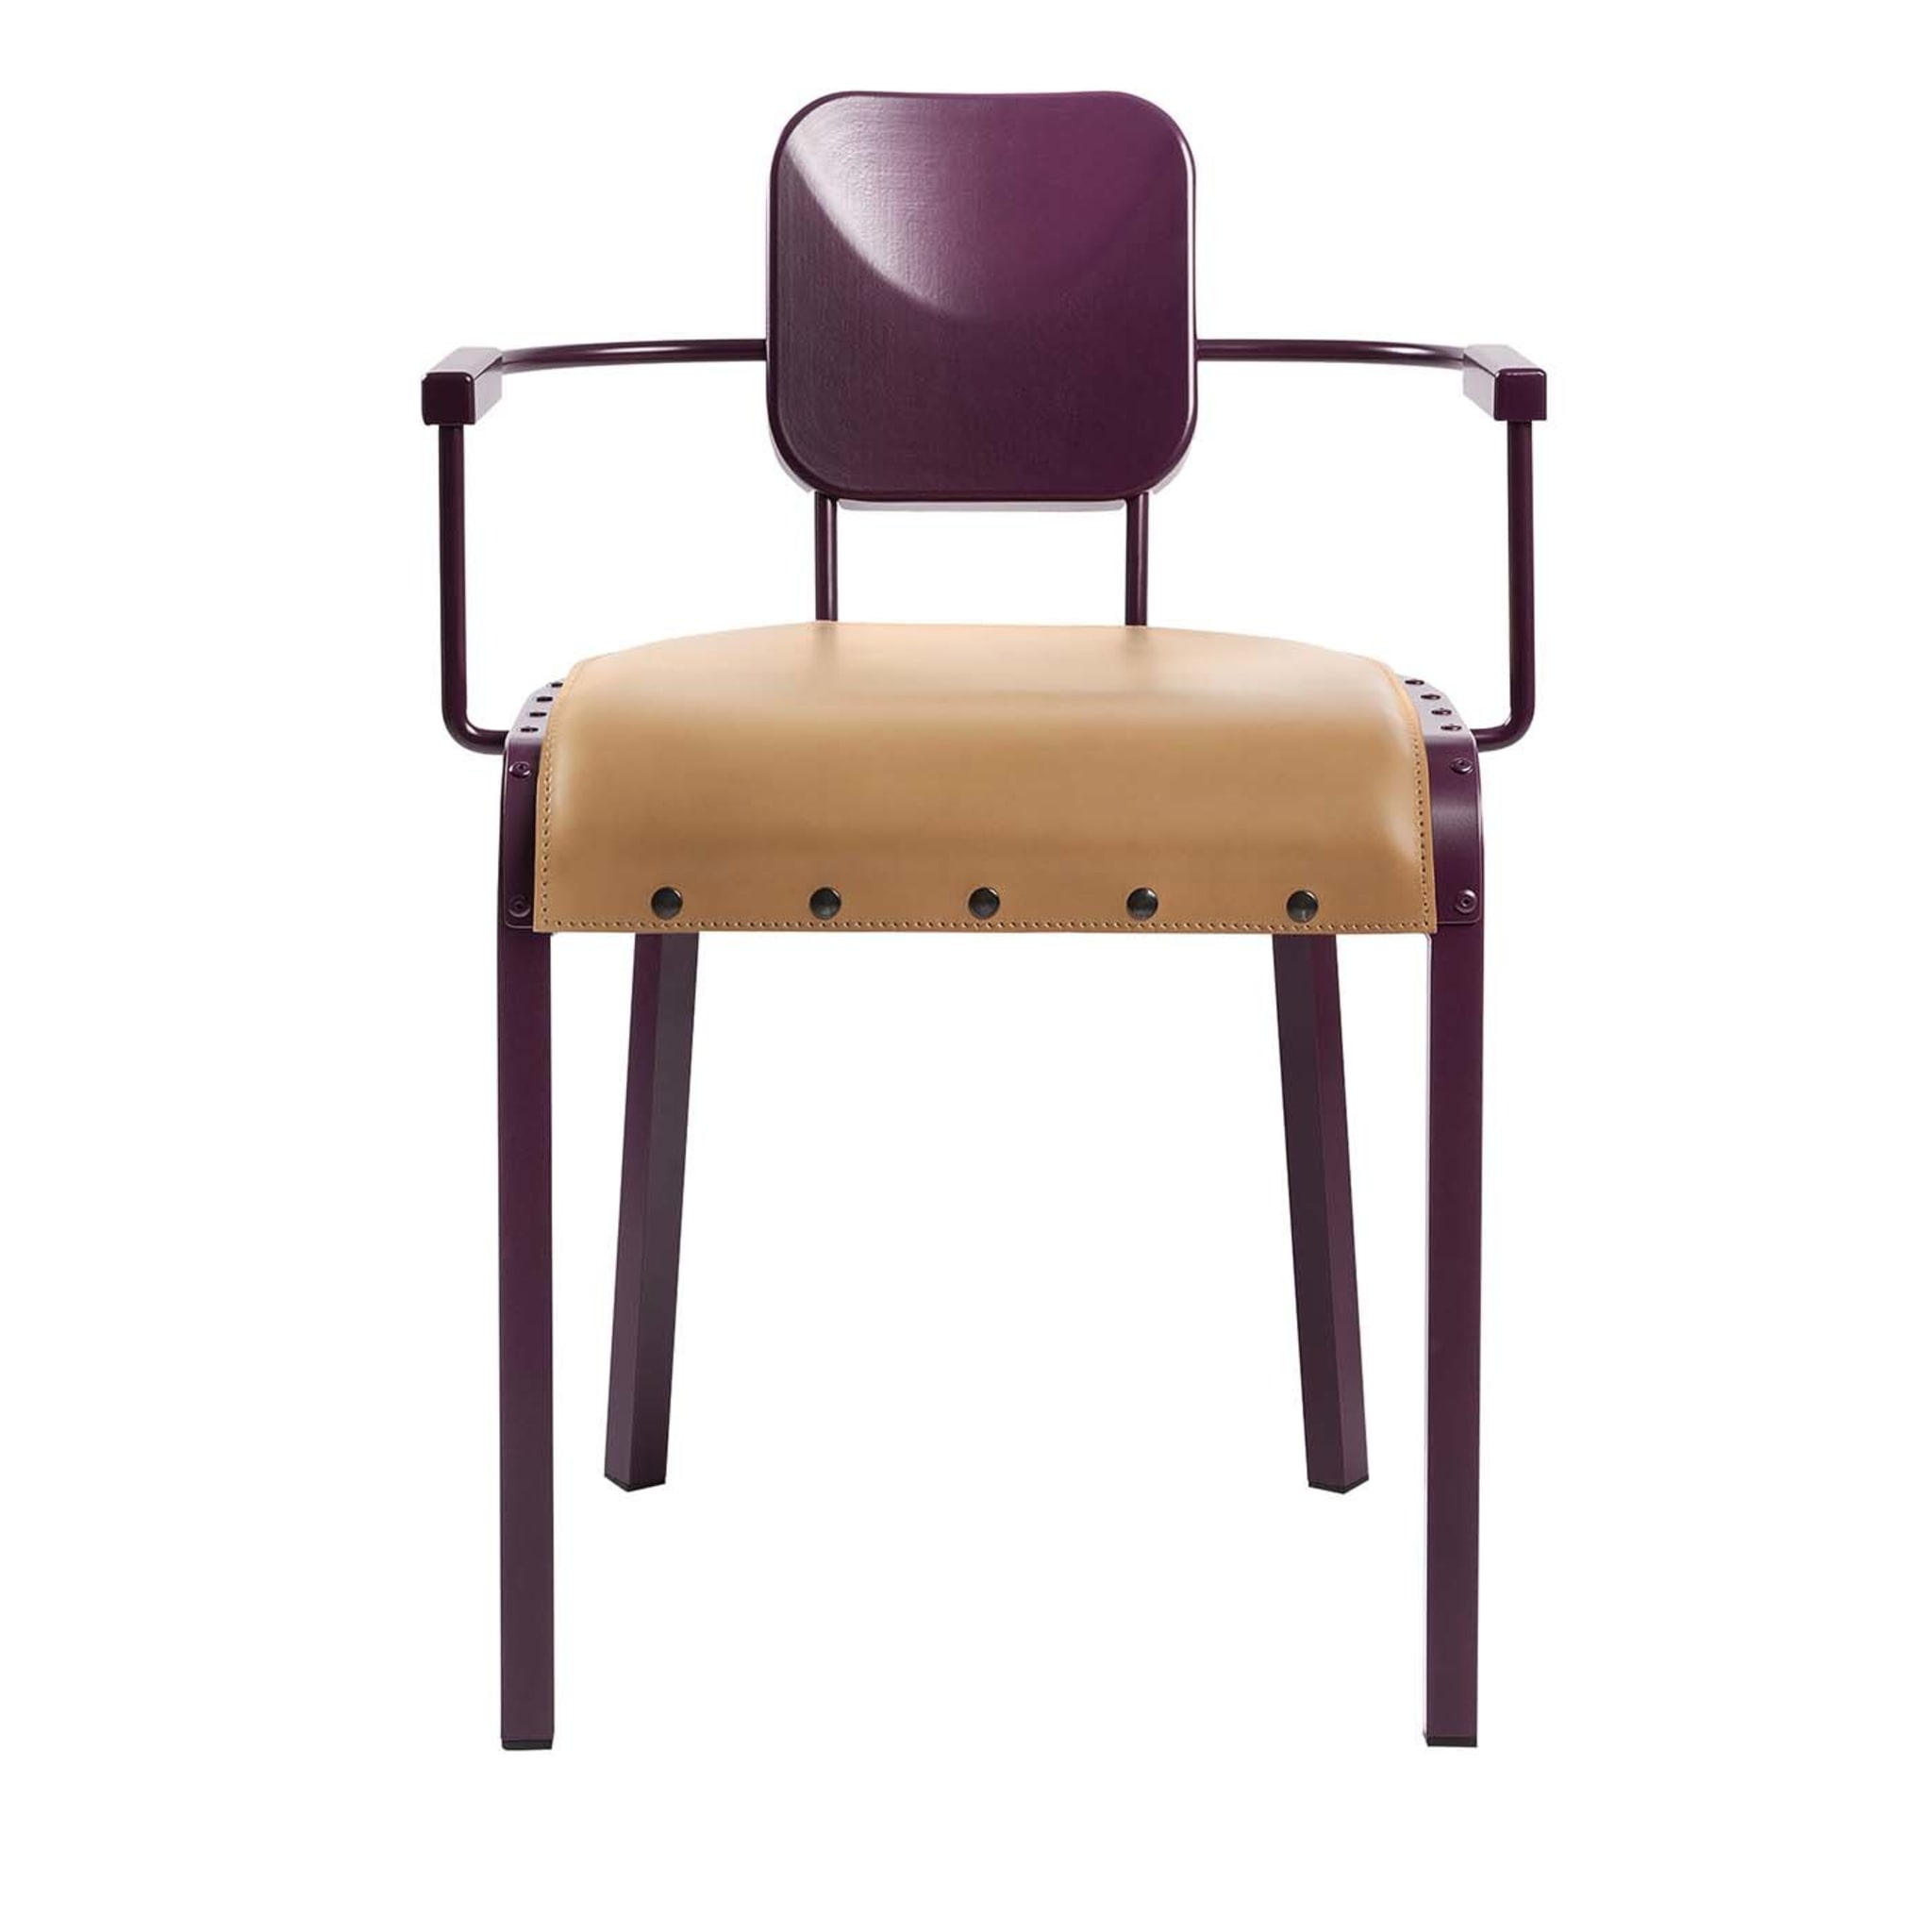 Rock4 Purple Chair with Leather Seat by Marc Sadler - Main view